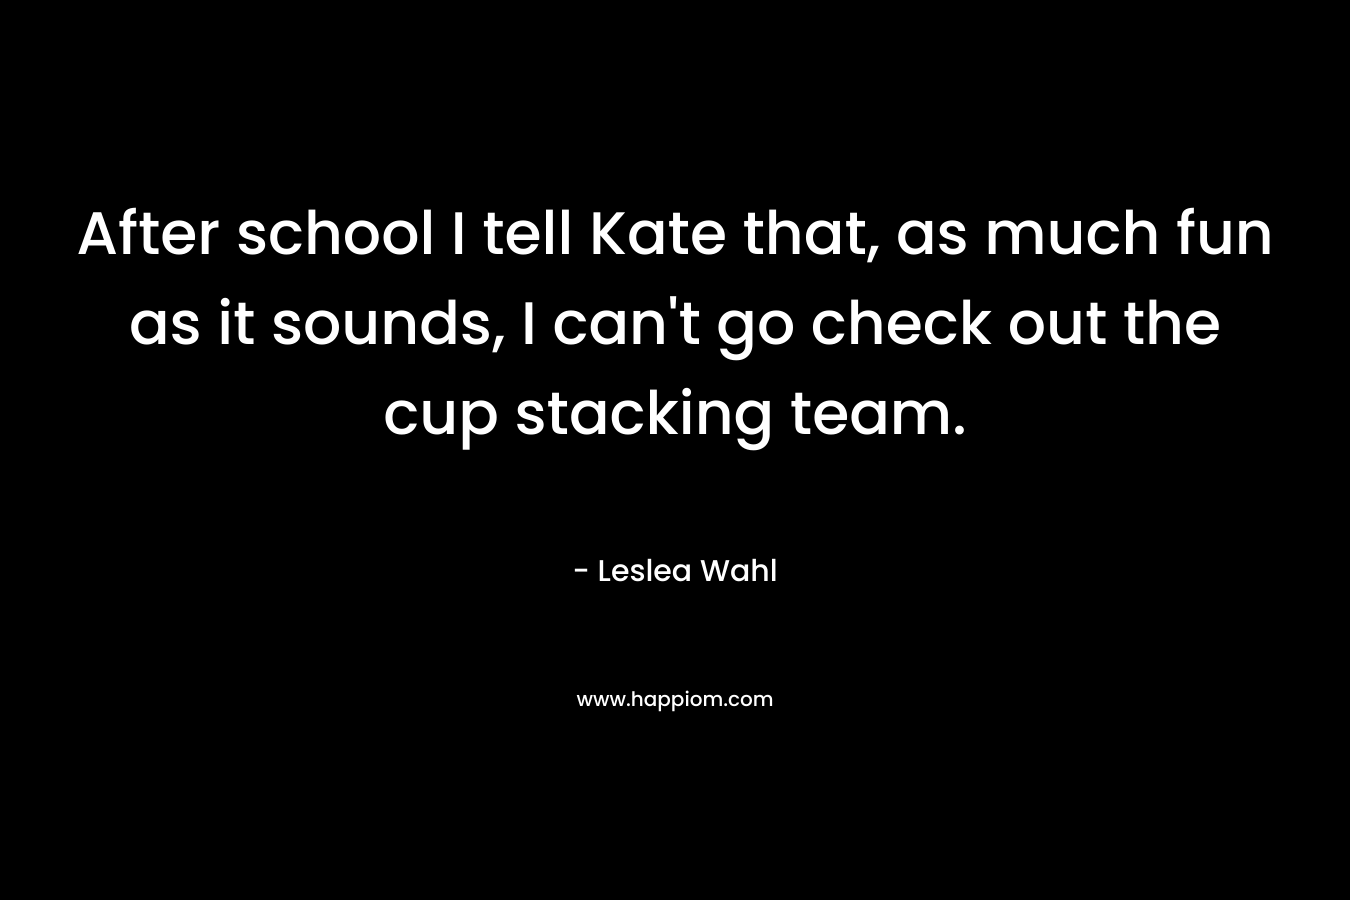 After school I tell Kate that, as much fun as it sounds, I can’t go check out the cup stacking team. – Leslea Wahl